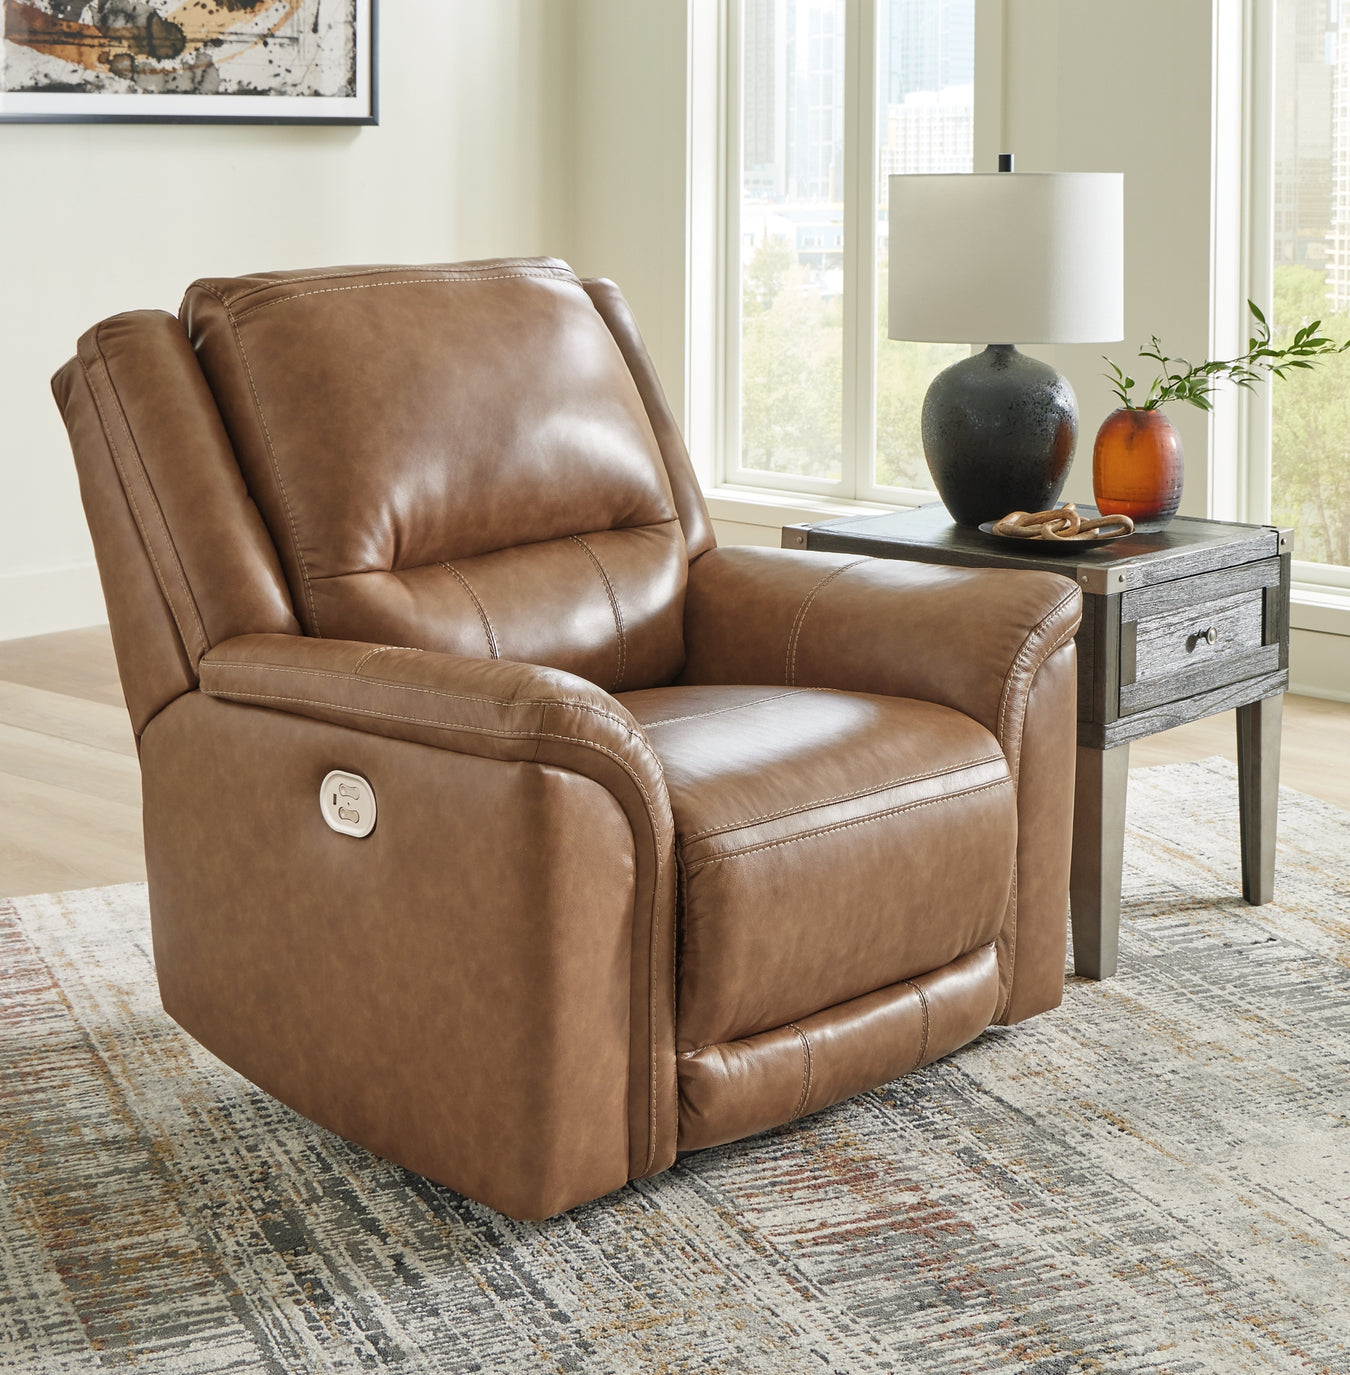 Recliners Bedding & Furniture Discounters